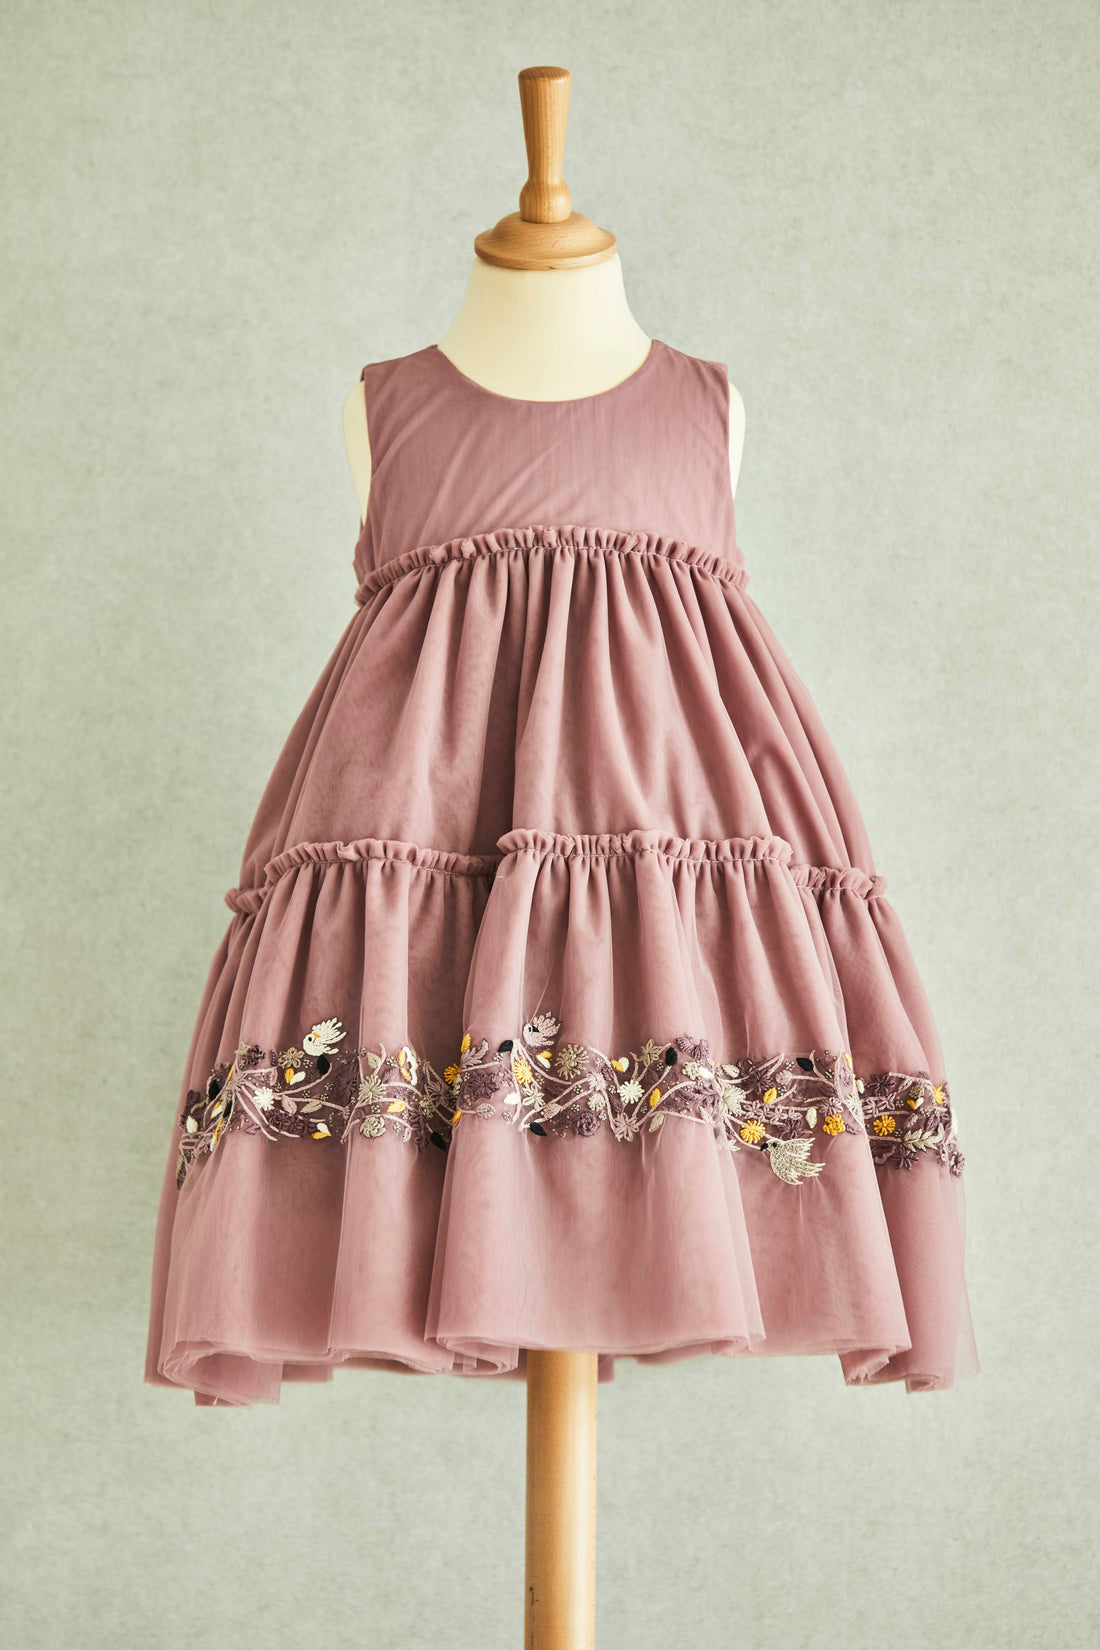 Hand Embroidered Thread Flowers and Birds Tiered Dress